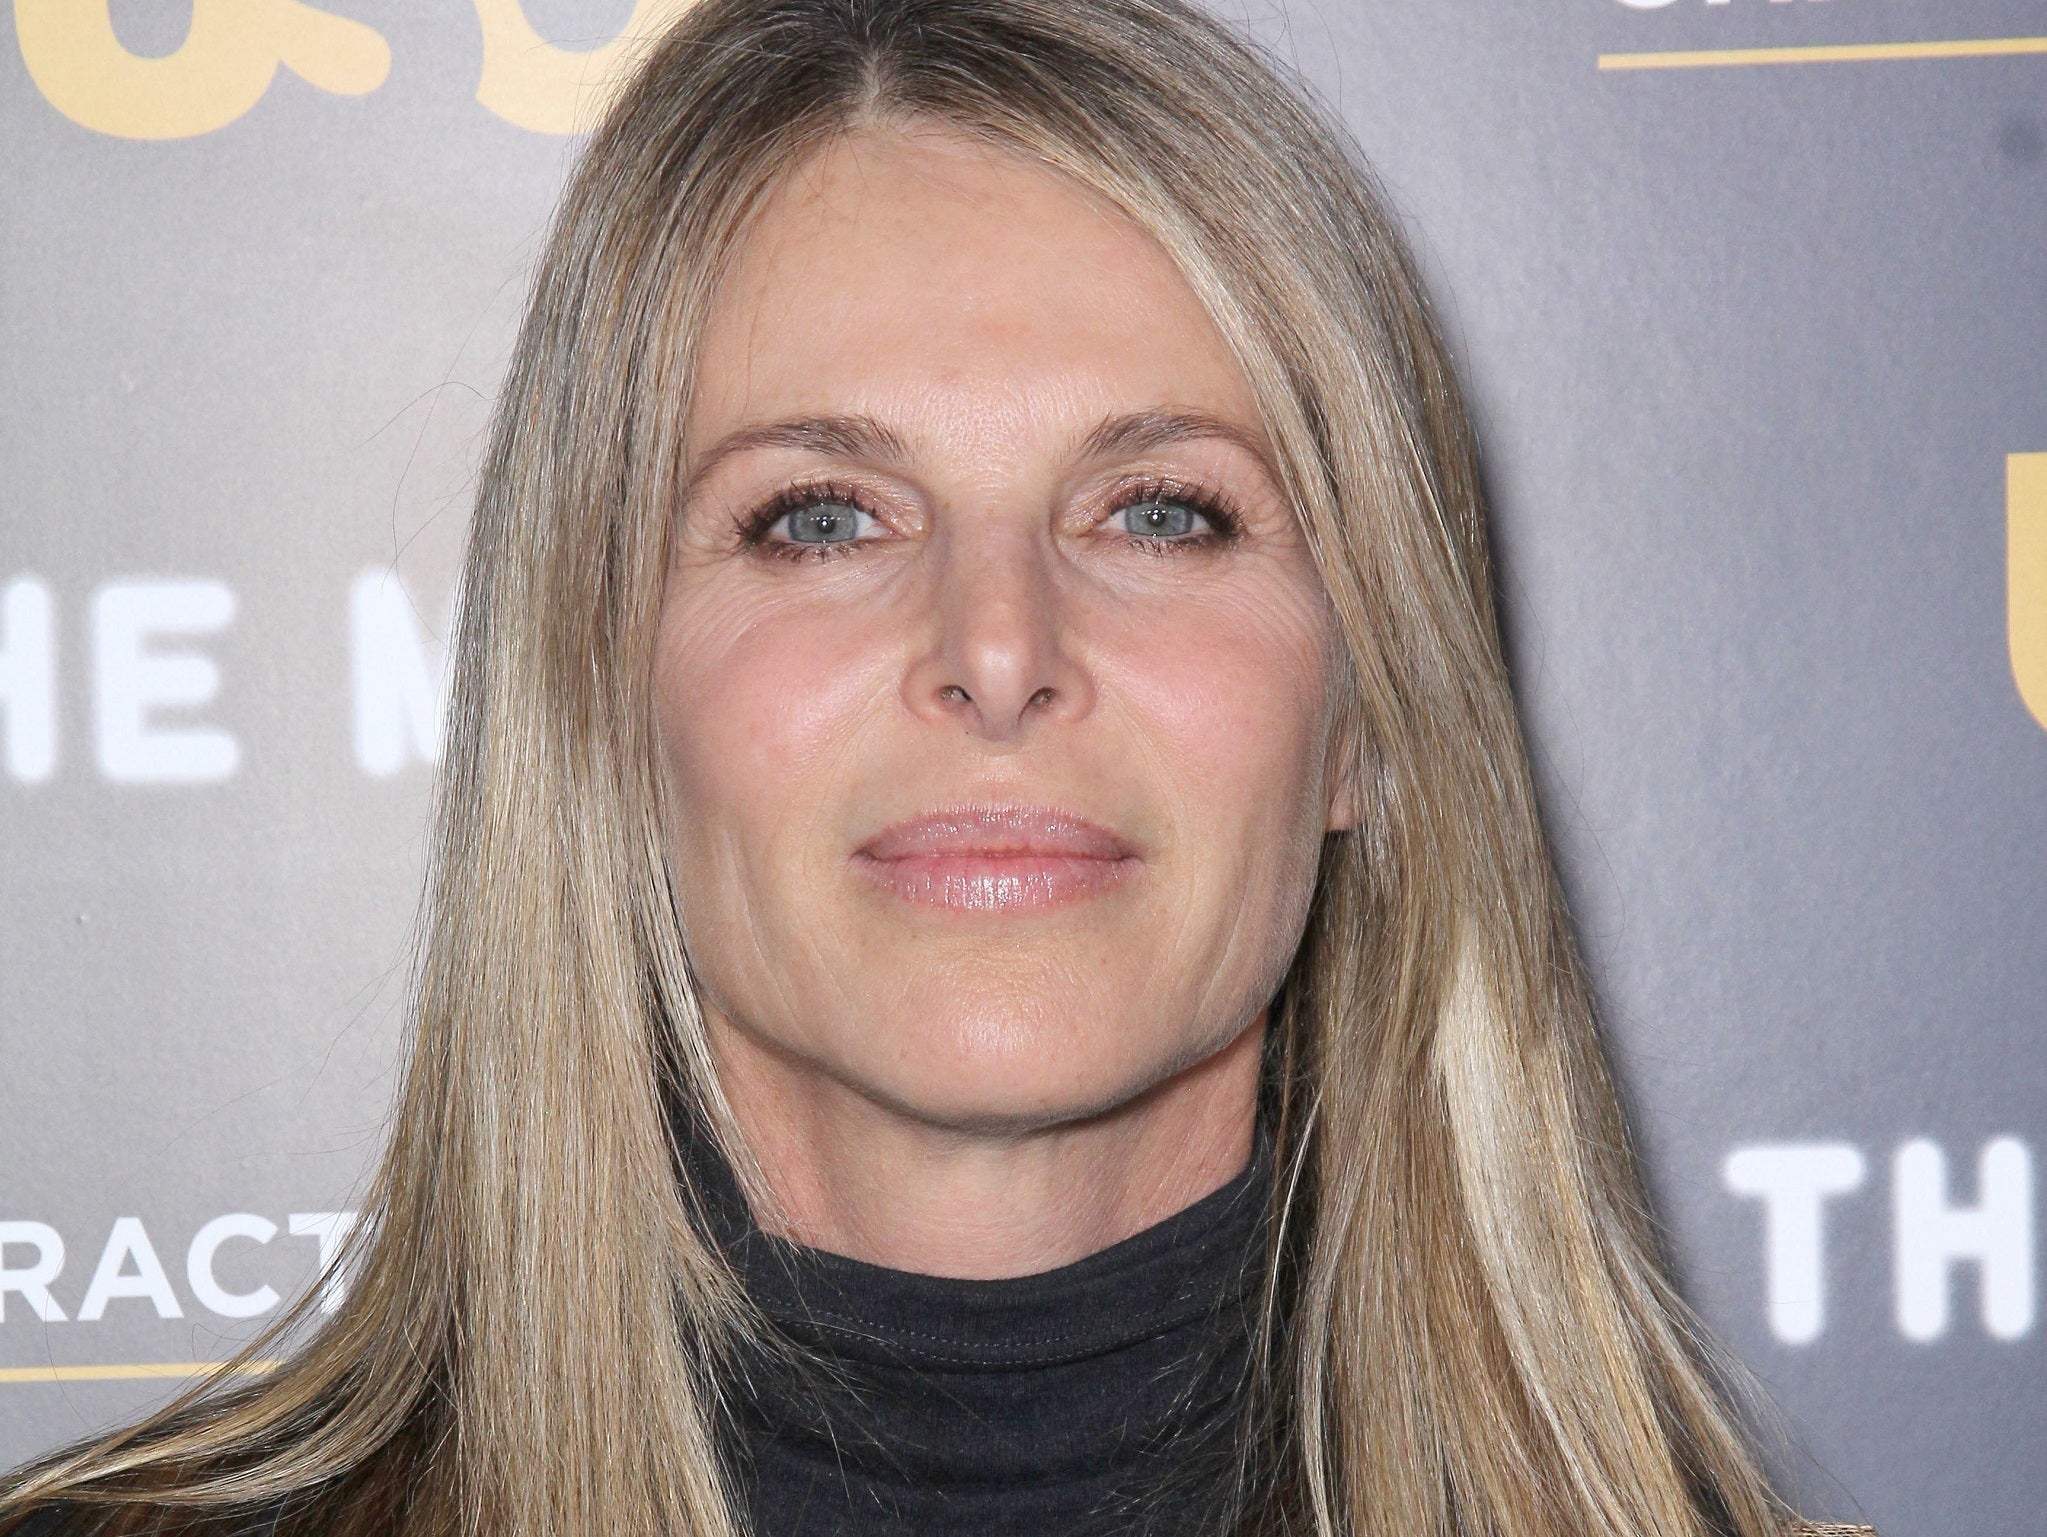 Catherine Oxenberg Dynasty Actress Speaks Of Struggle To Rescue Daughter From Cult That